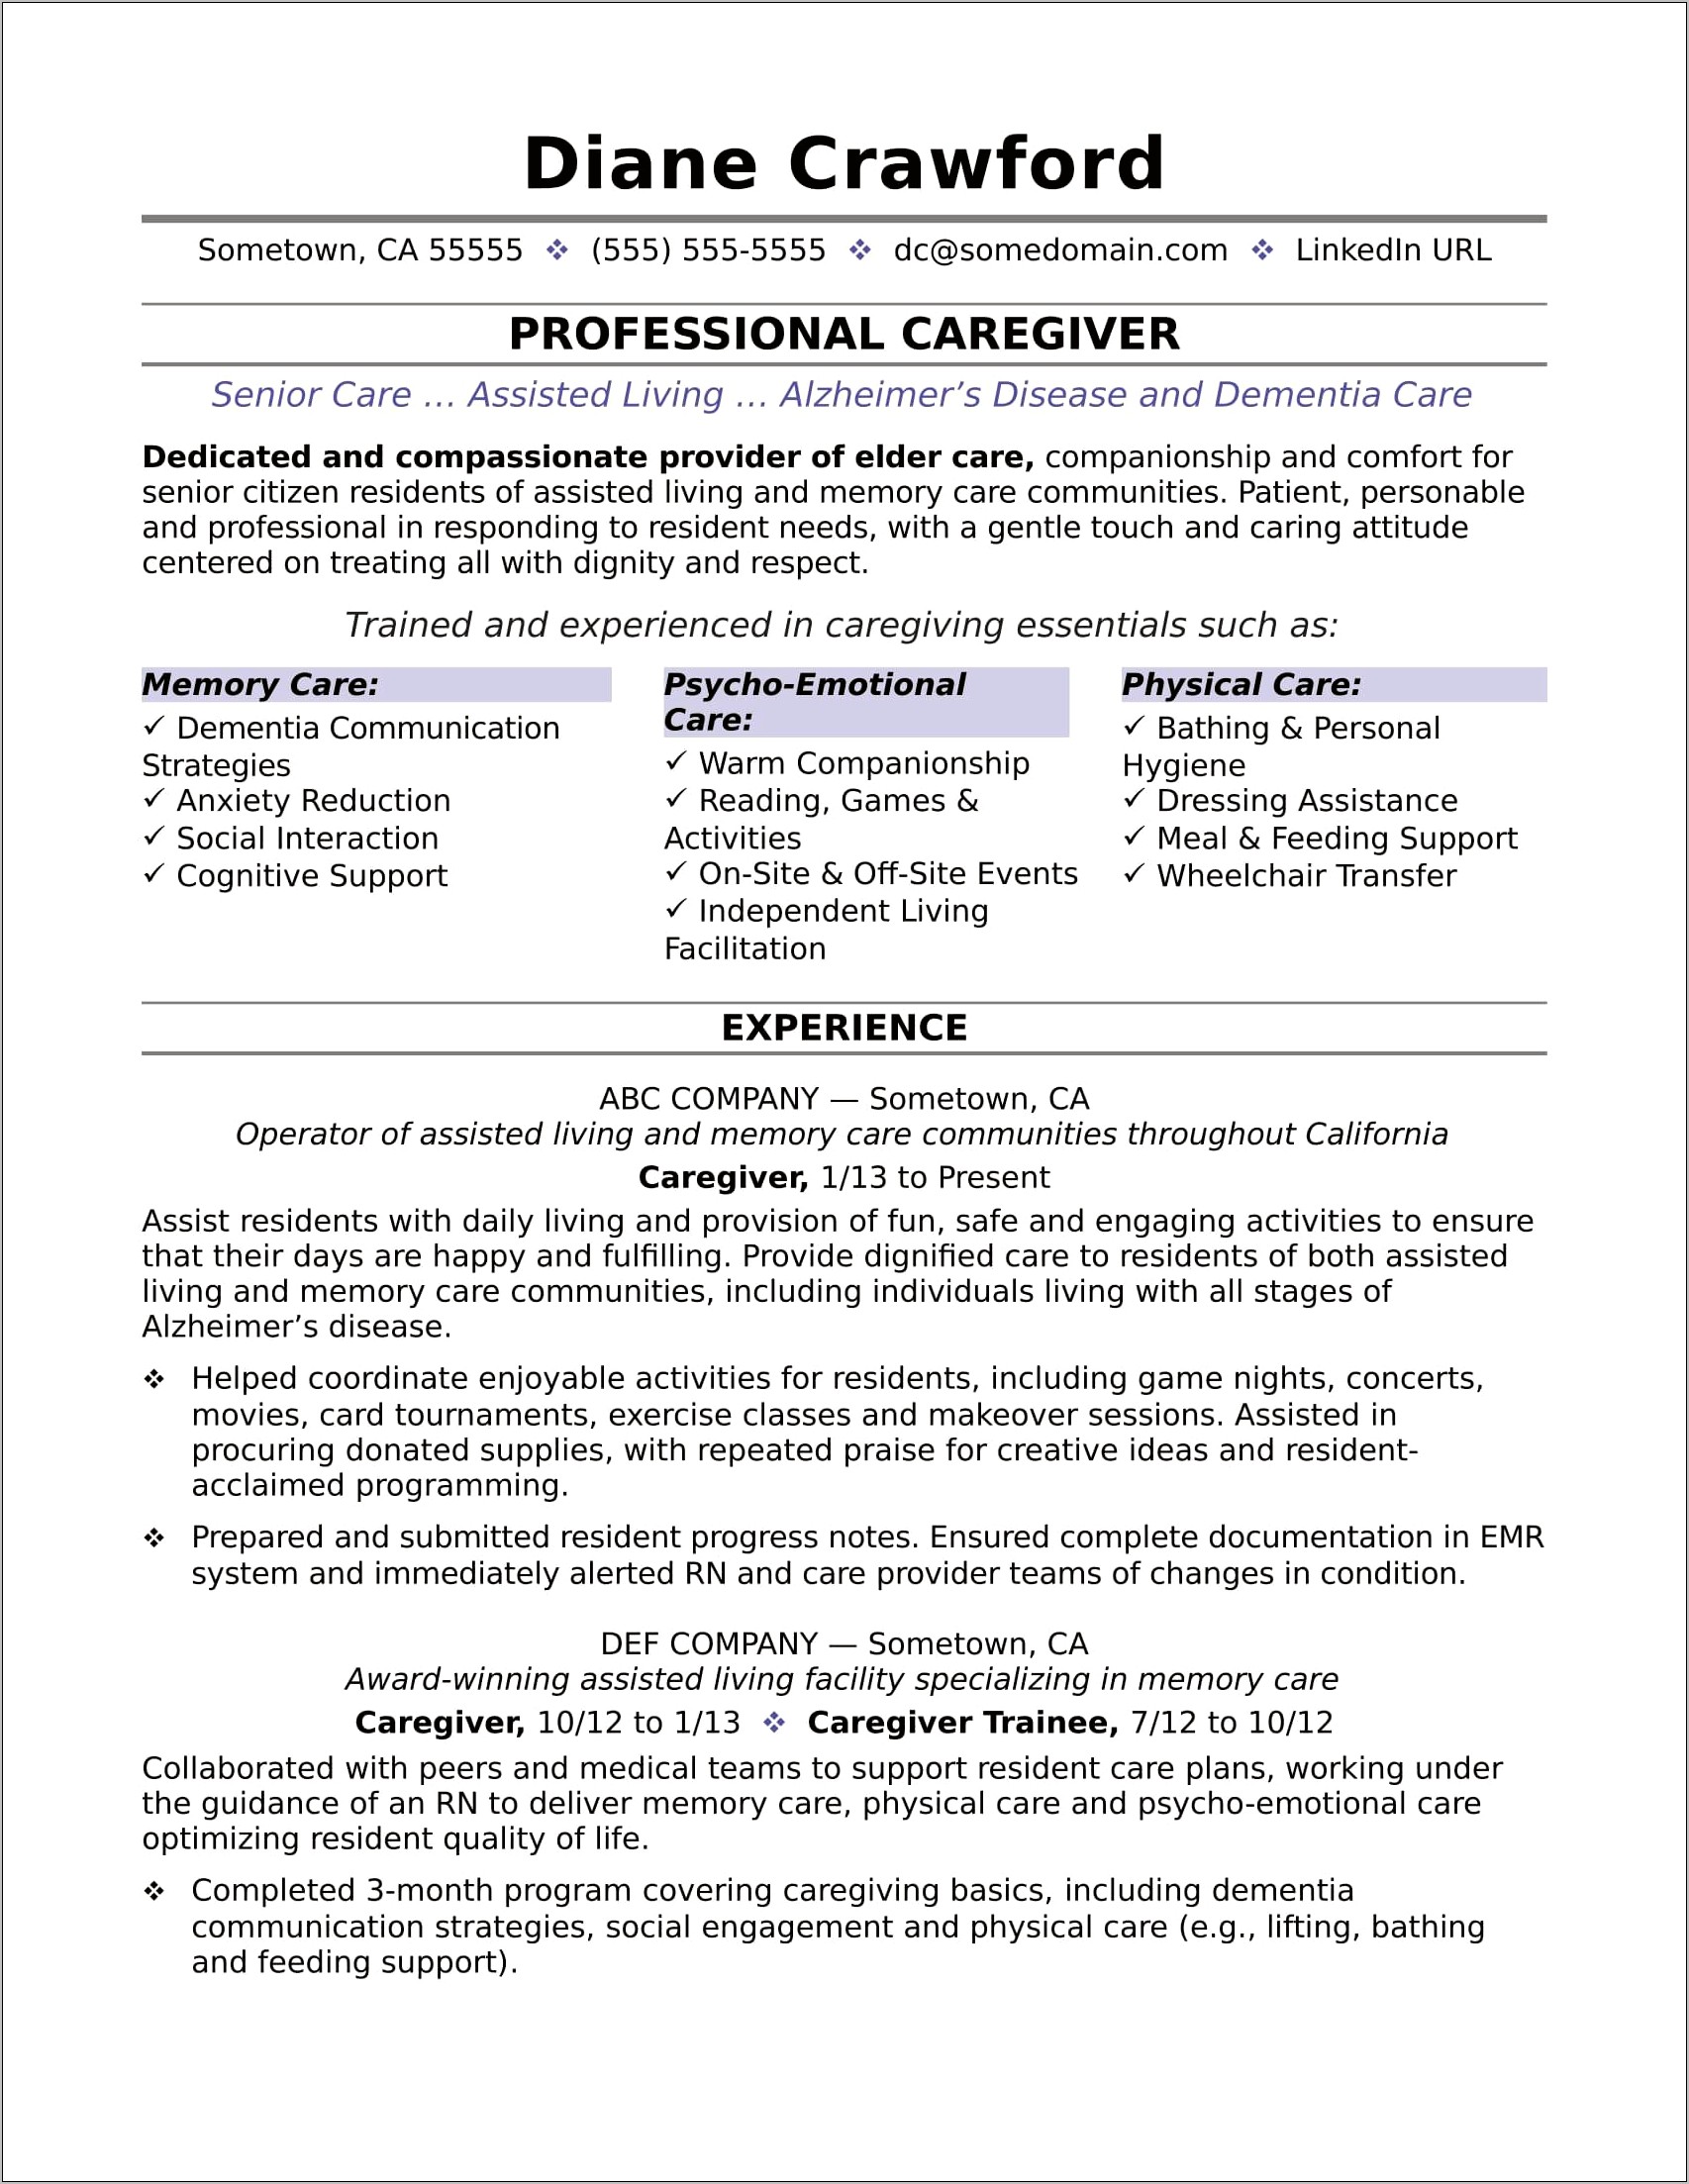 Example Resume Without Older Experience